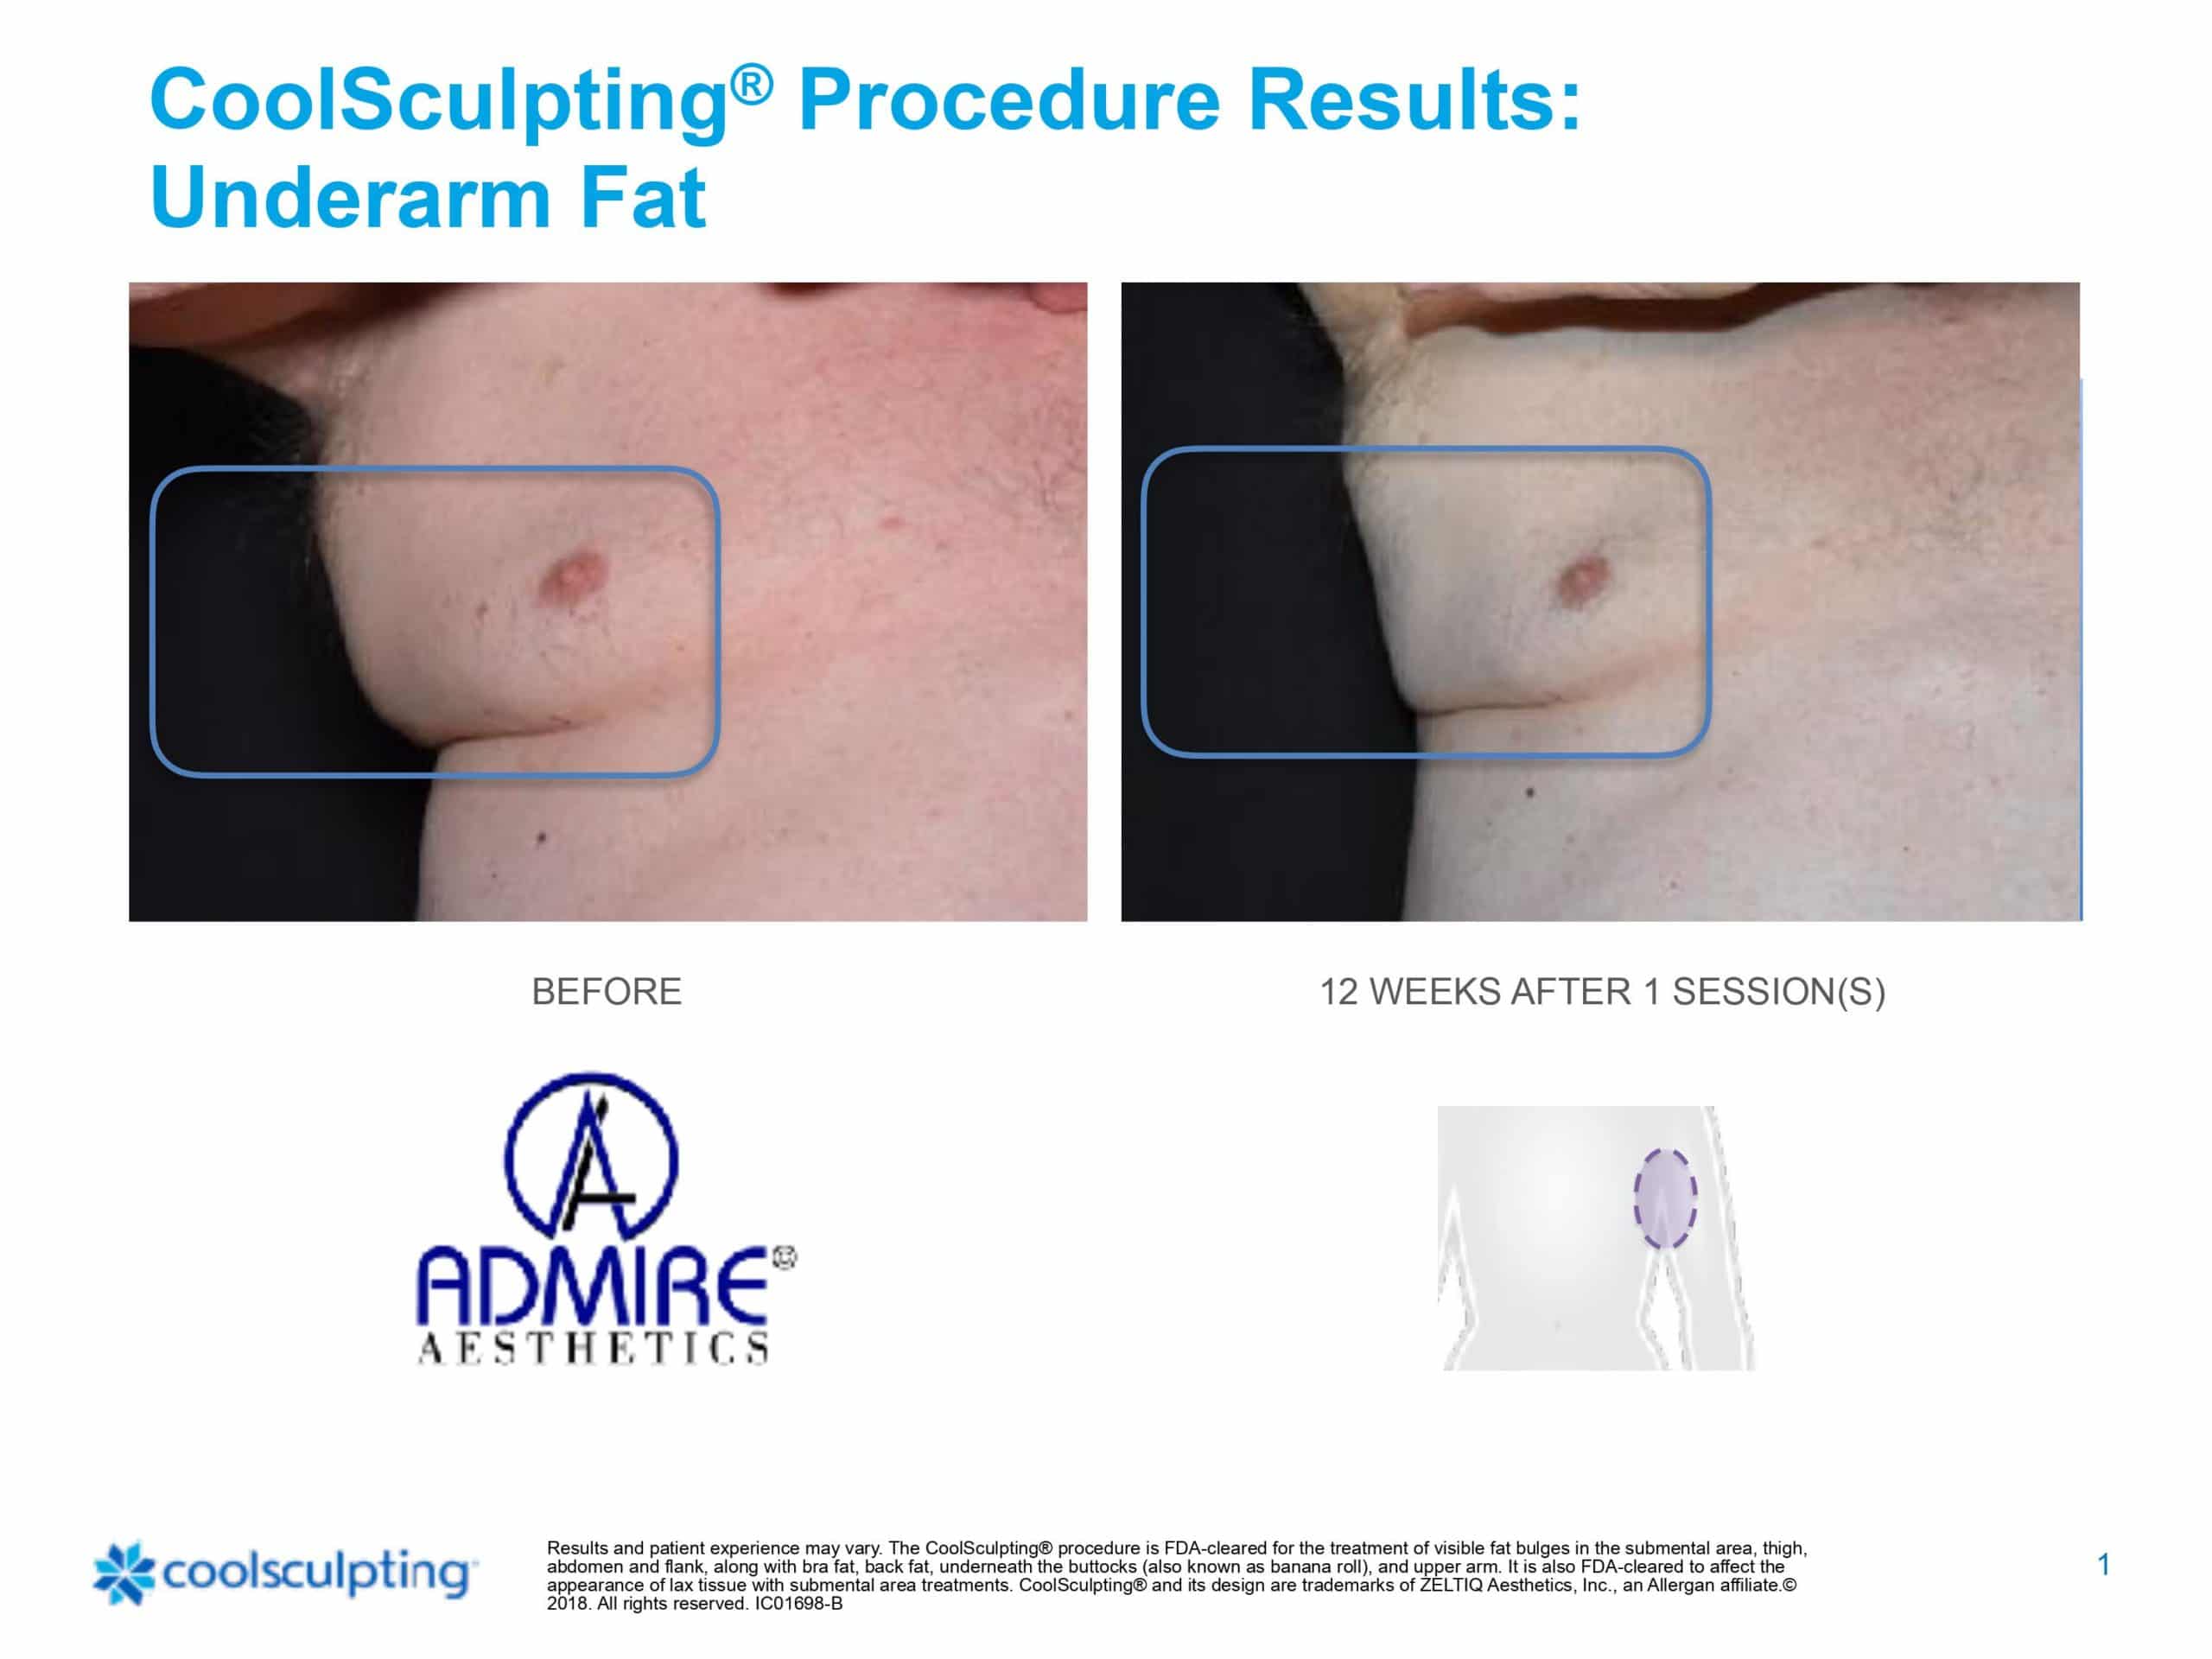 Mans underarm and chest fat before and after coolsculpting treatment at Admire Aesthetics in Medford, OR.